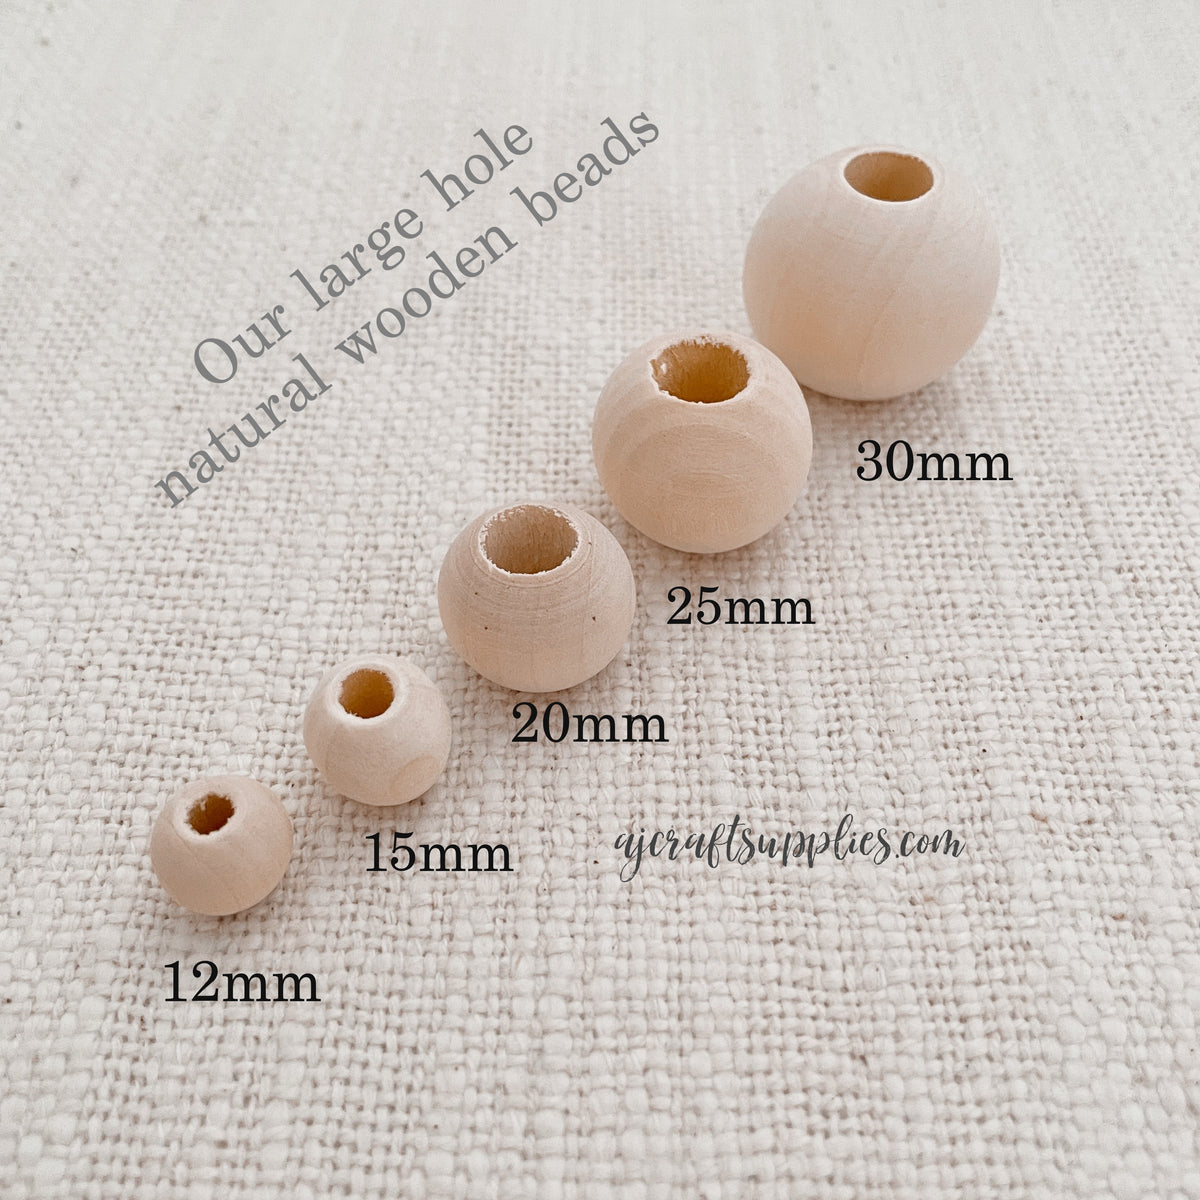 150 Pcs Wooden Beads, Large Hole Unfinished Natural Round Wooden Loose  Beads (20mm x Diameter 10mm Hole,12mm x Diameter 6mm Hole)